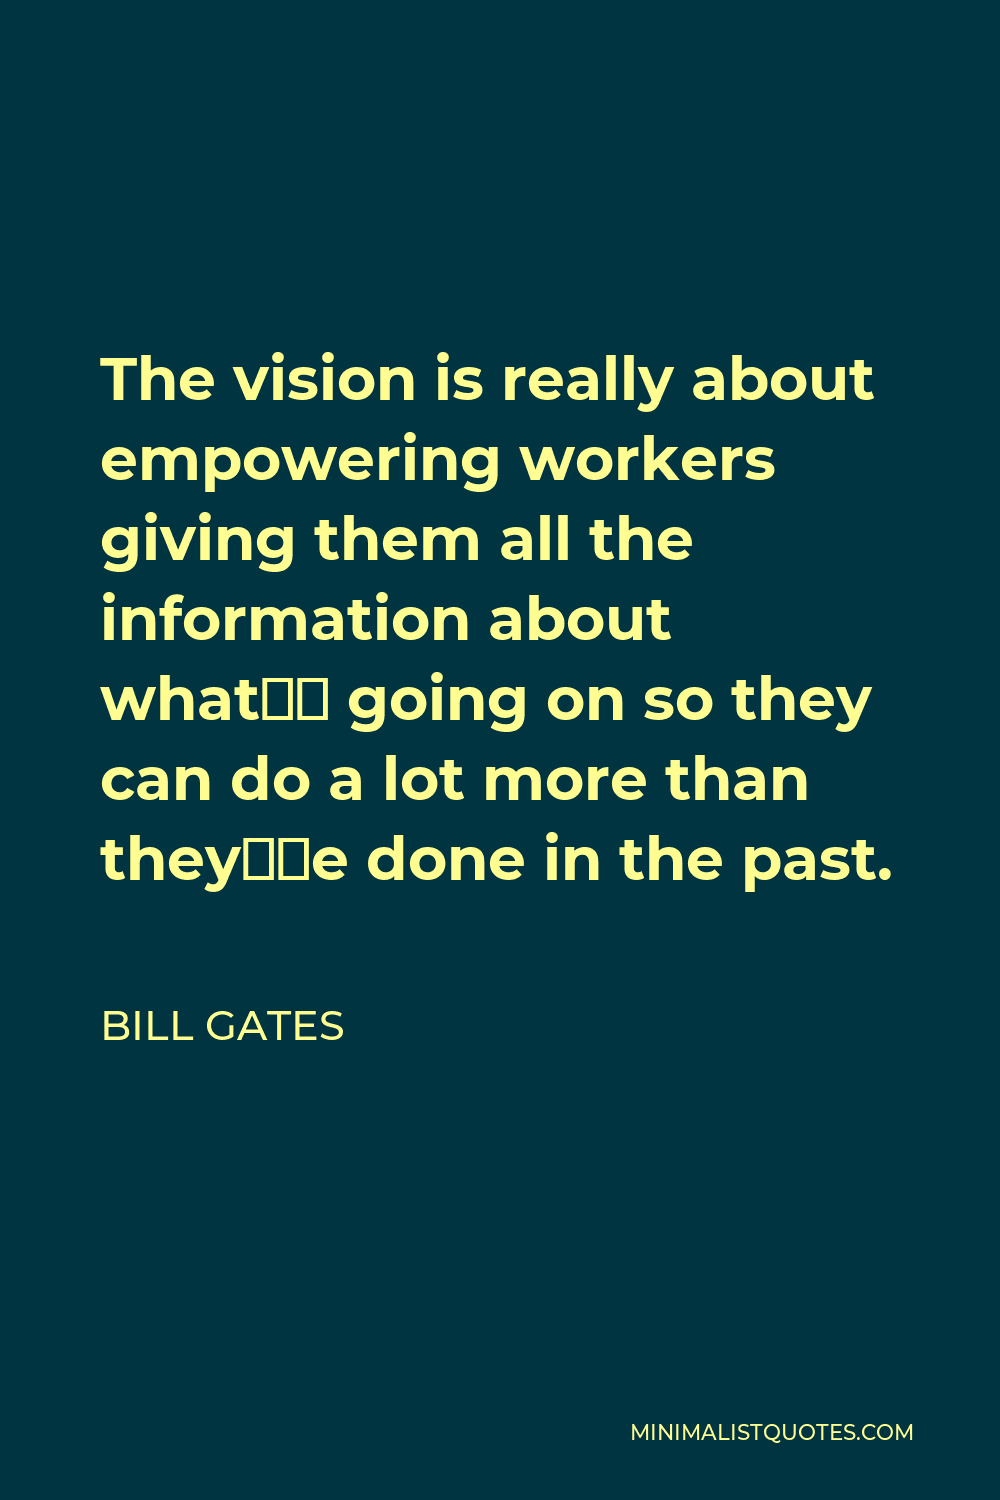 Bill Gates Quote - The vision is really about empowering workers giving them all the information about what’s going on so they can do a lot more than they’ve done in the past.